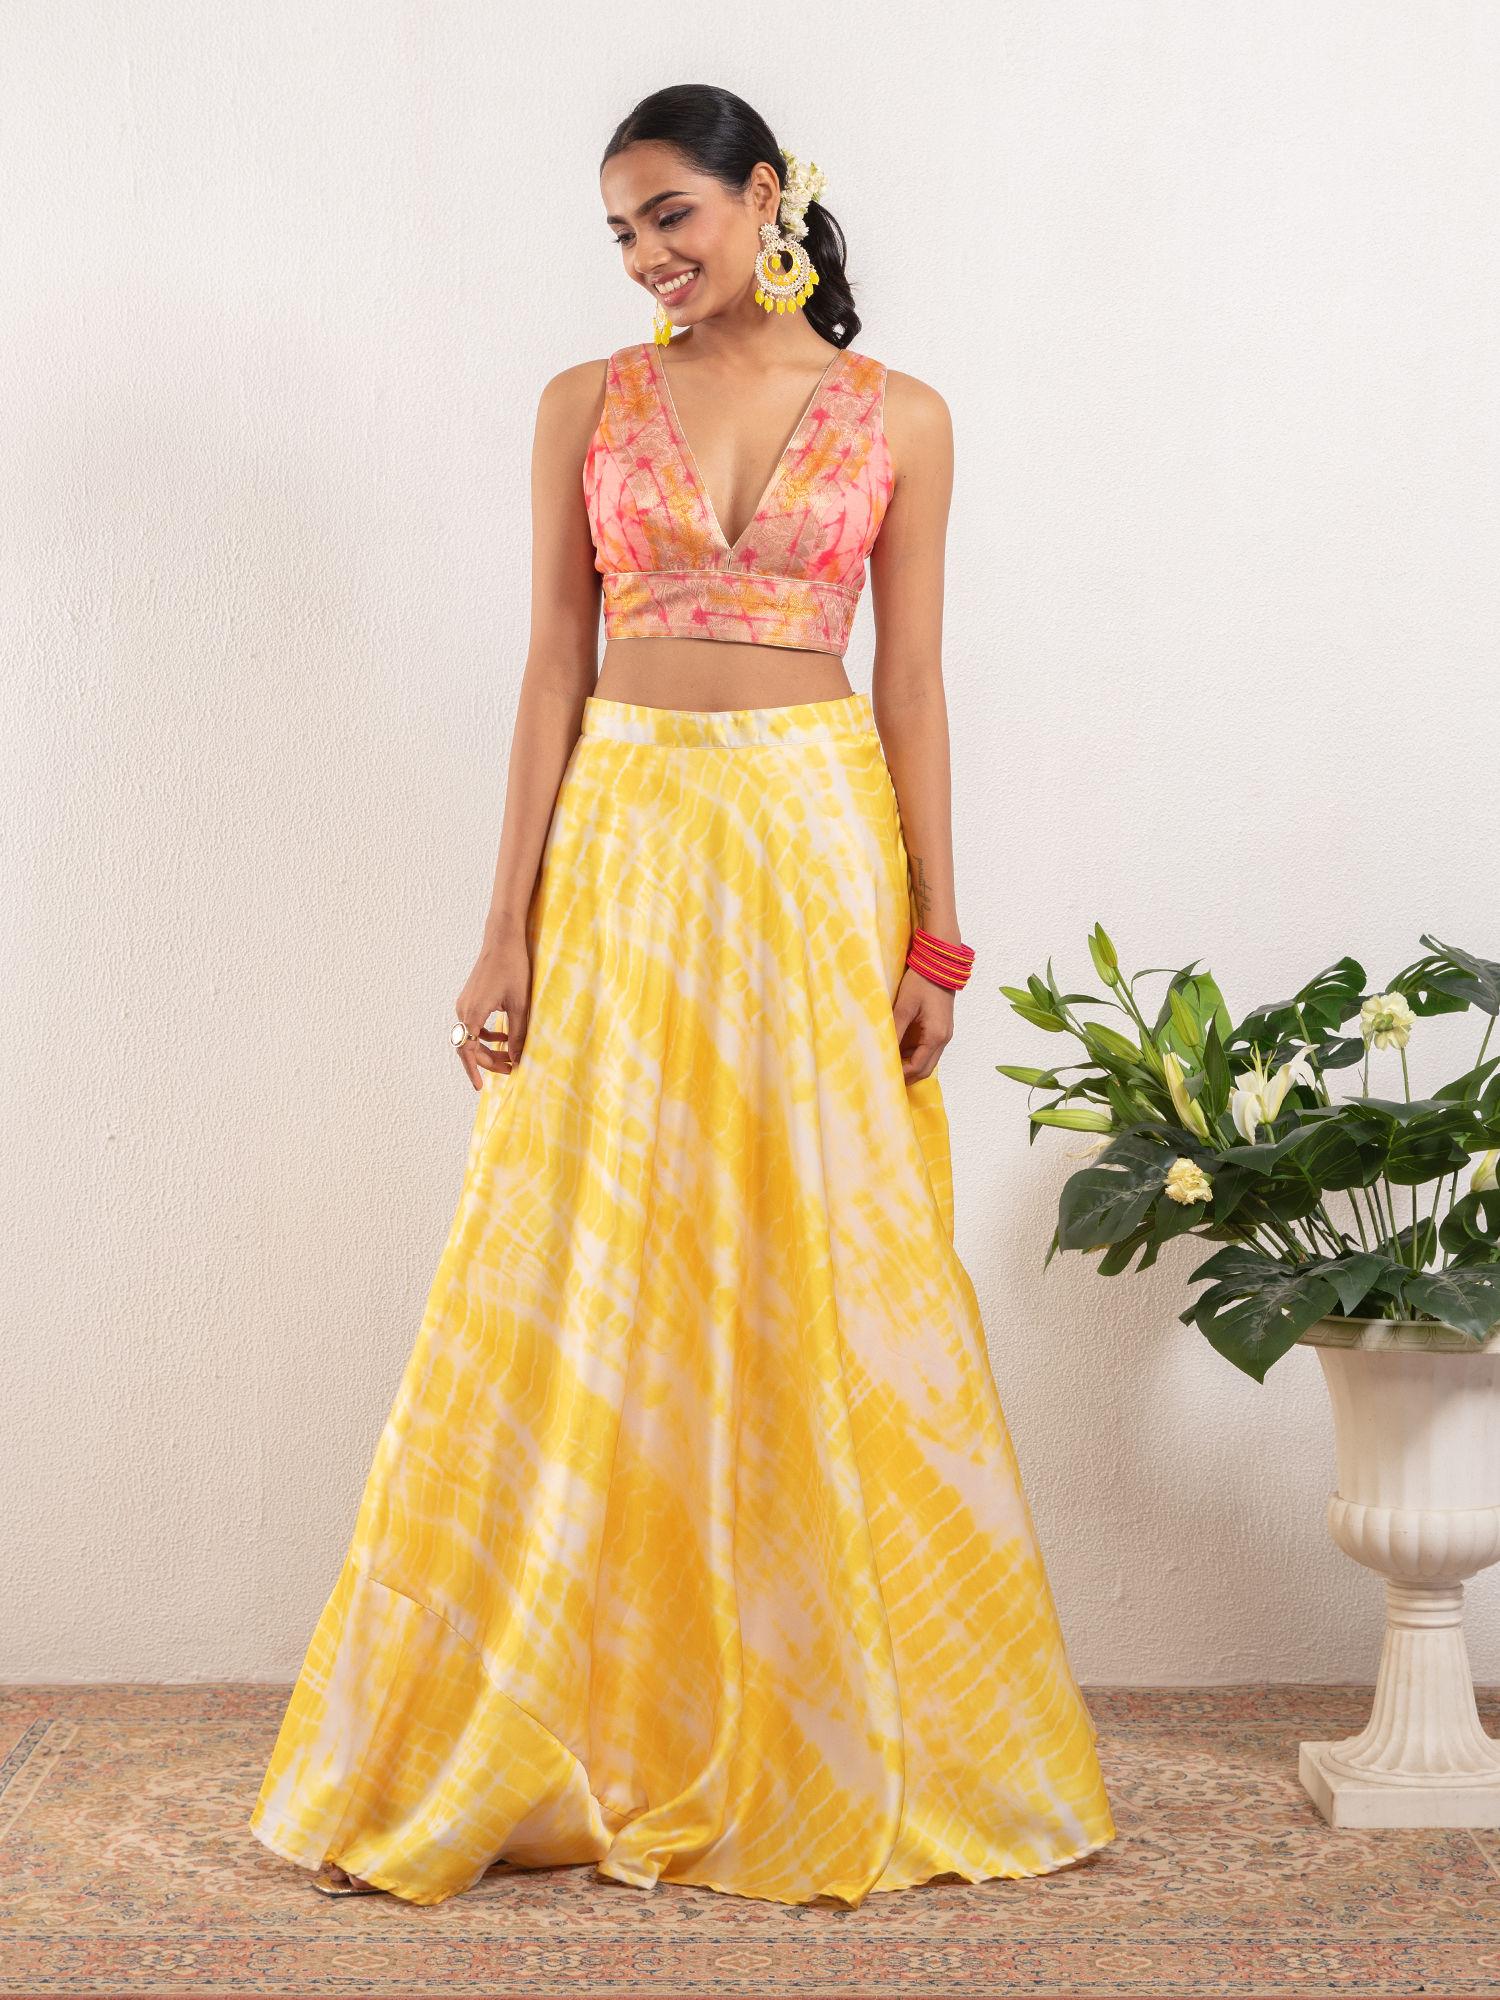 yellow plunging neck top with tie dye skirt ggleh43 (set of 2)